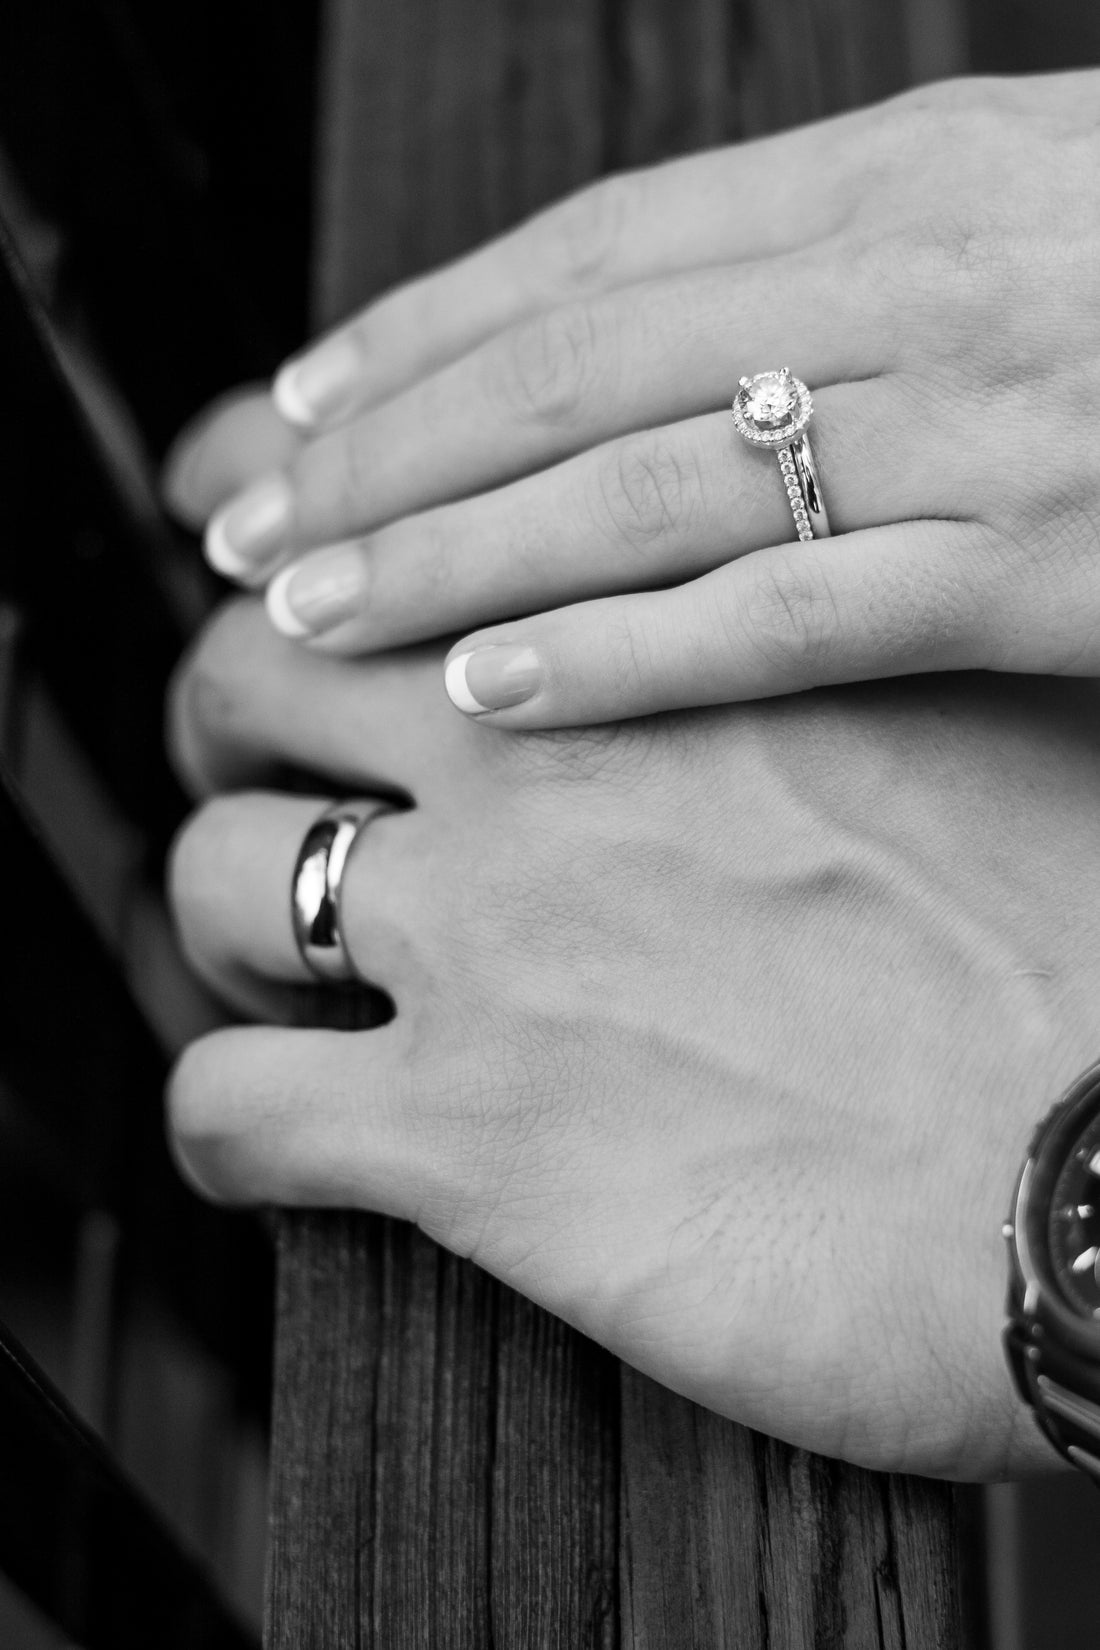 The Difference Between An Engagement Ring and a Wedding Ring